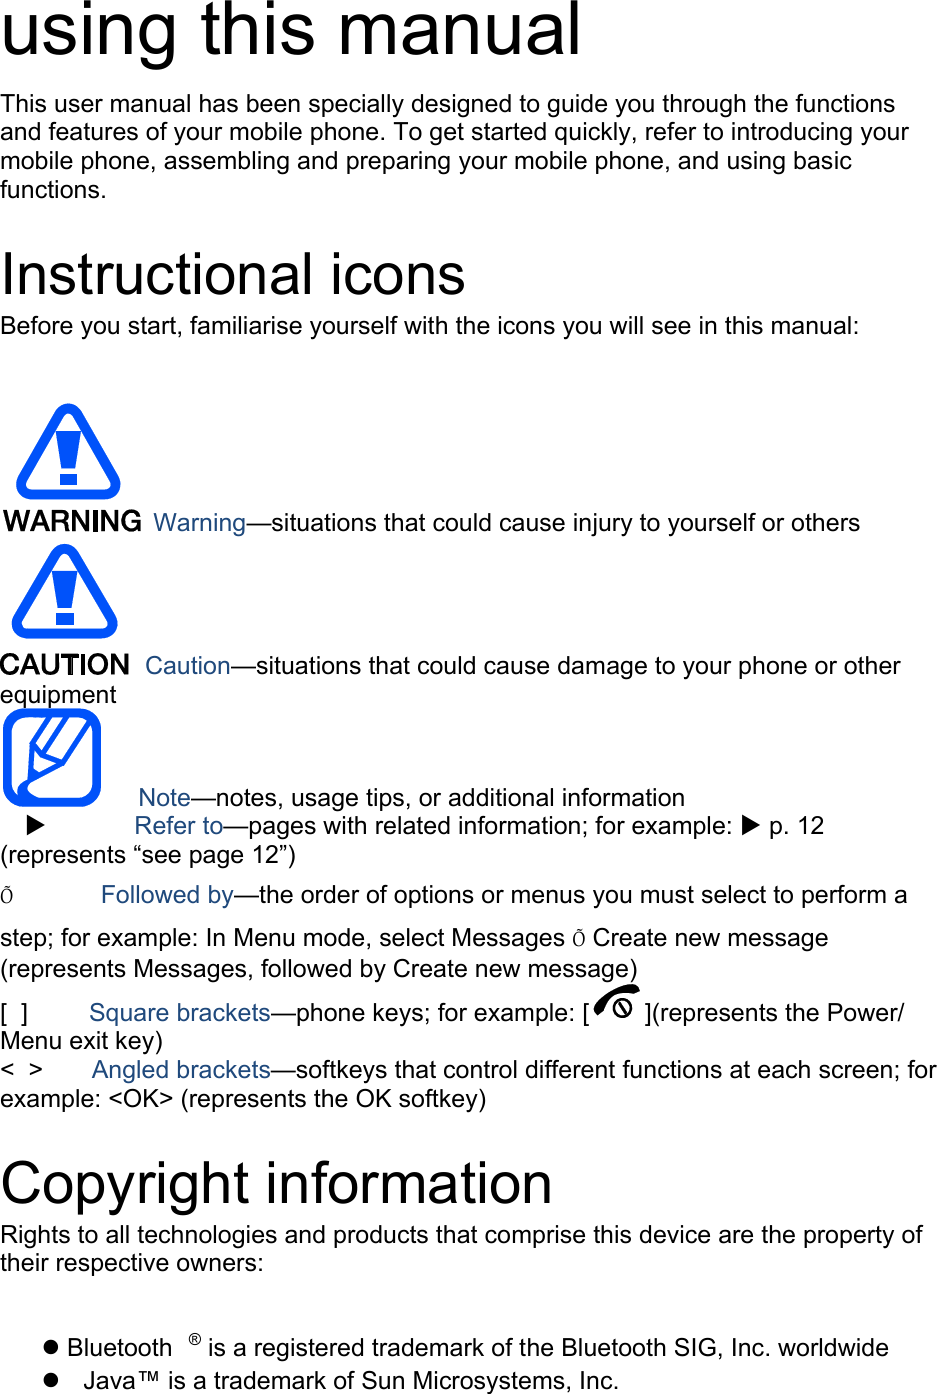 using this manual This user manual has been specially designed to guide you through the functions and features of your mobile phone. To get started quickly, refer to introducing your mobile phone, assembling and preparing your mobile phone, and using basic functions.   Instructional icons Before you start, familiarise yourself with the icons you will see in this manual:     Warning—situations that could cause injury to yourself or others  Caution—situations that could cause damage to your phone or other equipment    Note—notes, usage tips, or additional information   X       Refer to—pages with related information; for example: X p. 12 (represents “see page 12”) Õ       Followed by—the order of options or menus you must select to perform a step; for example: In Menu mode, select Messages Õ Create new message (represents Messages, followed by Create new message) [  ]     Square brackets—phone keys; for example: [ ](represents the Power/ Menu exit key) &lt;  &gt;    Angled brackets—softkeys that control different functions at each screen; for example: &lt;OK&gt; (represents the OK softkey)  Copyright information Rights to all technologies and products that comprise this device are the property of their respective owners:  z Bluetooth ® is a registered trademark of the Bluetooth SIG, Inc. worldwide z  Java™ is a trademark of Sun Microsystems, Inc. 